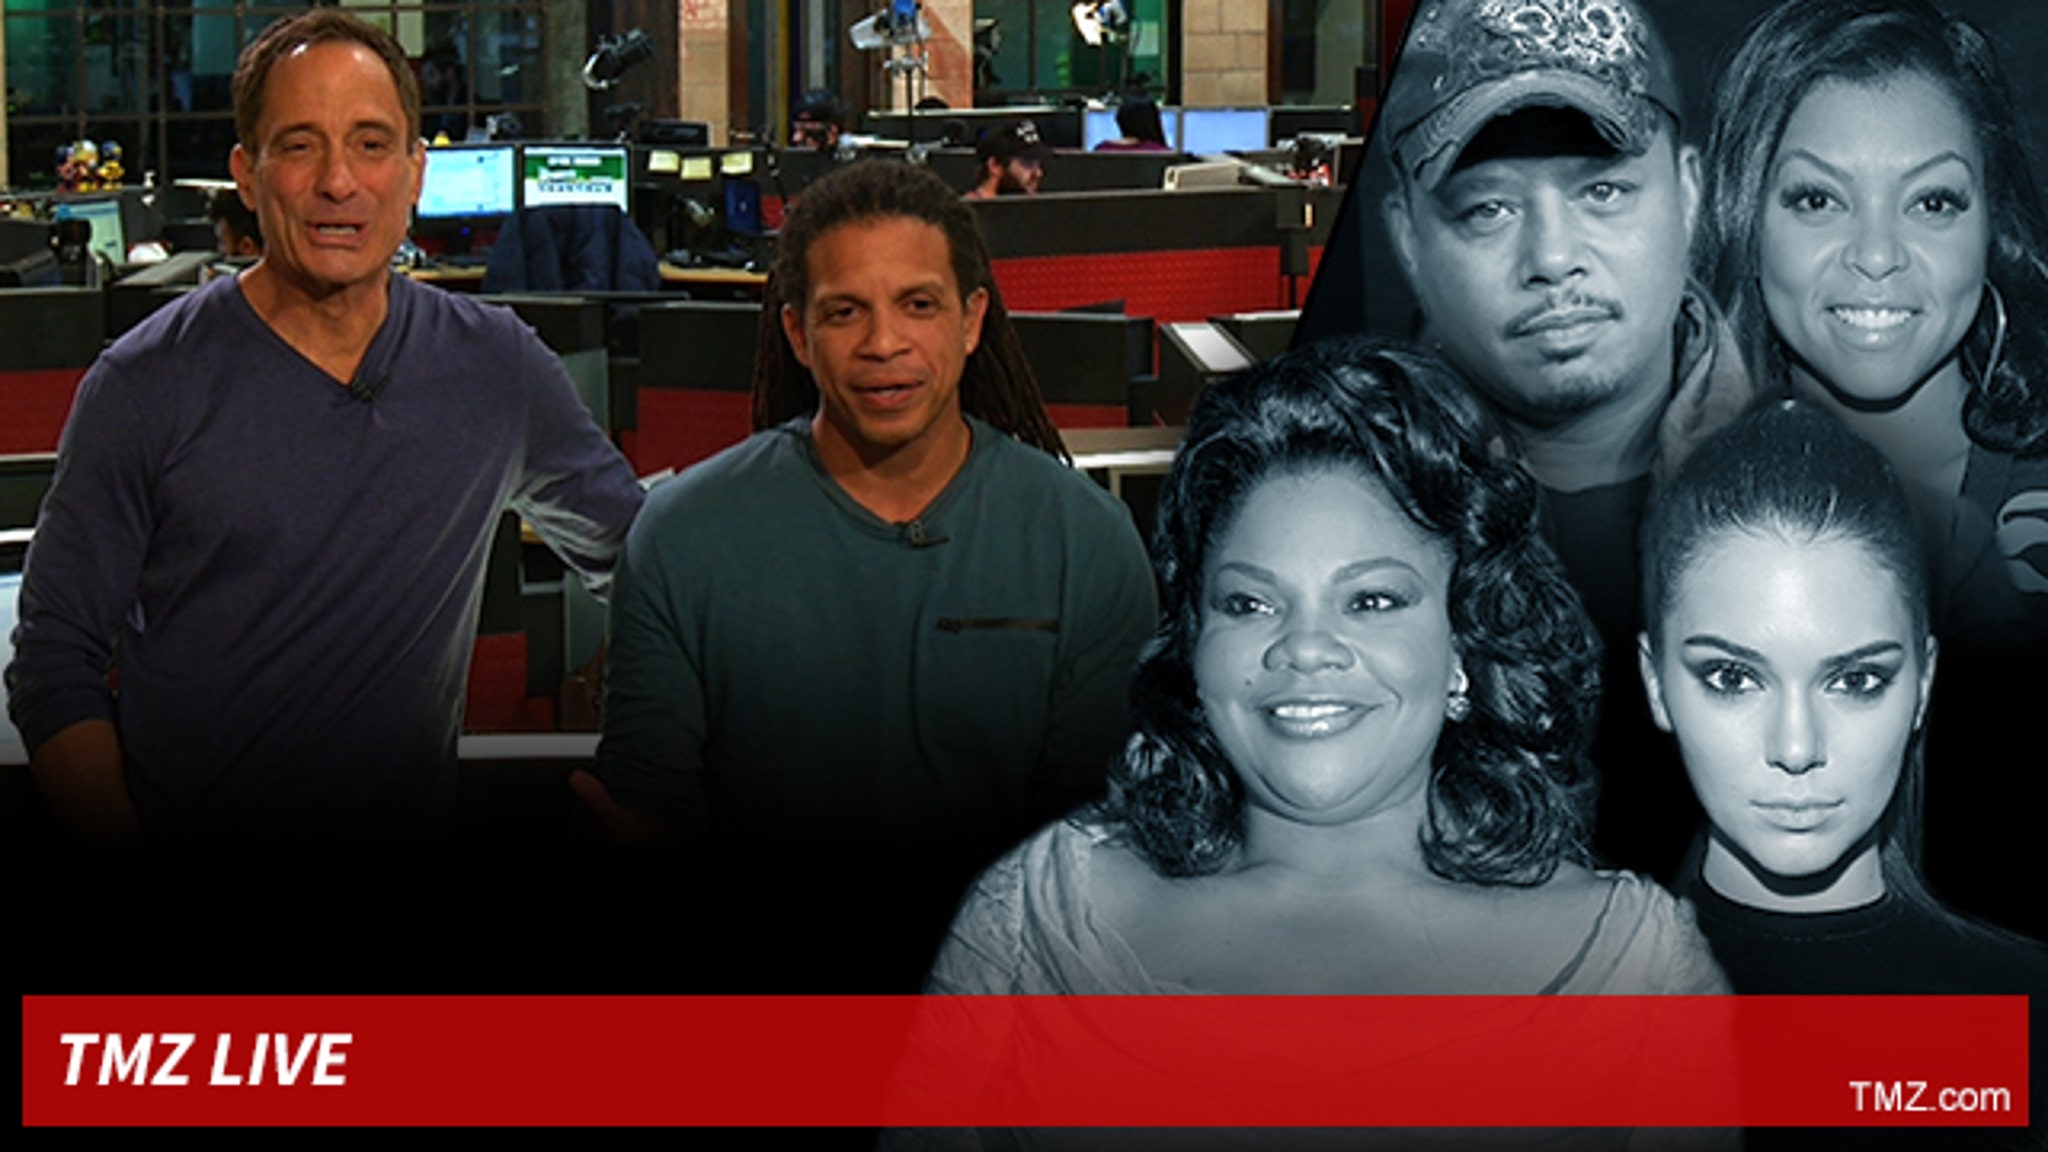 TMZ Live 03/05/15: FOX's 'Empire' -- To Say the N-Word... or...